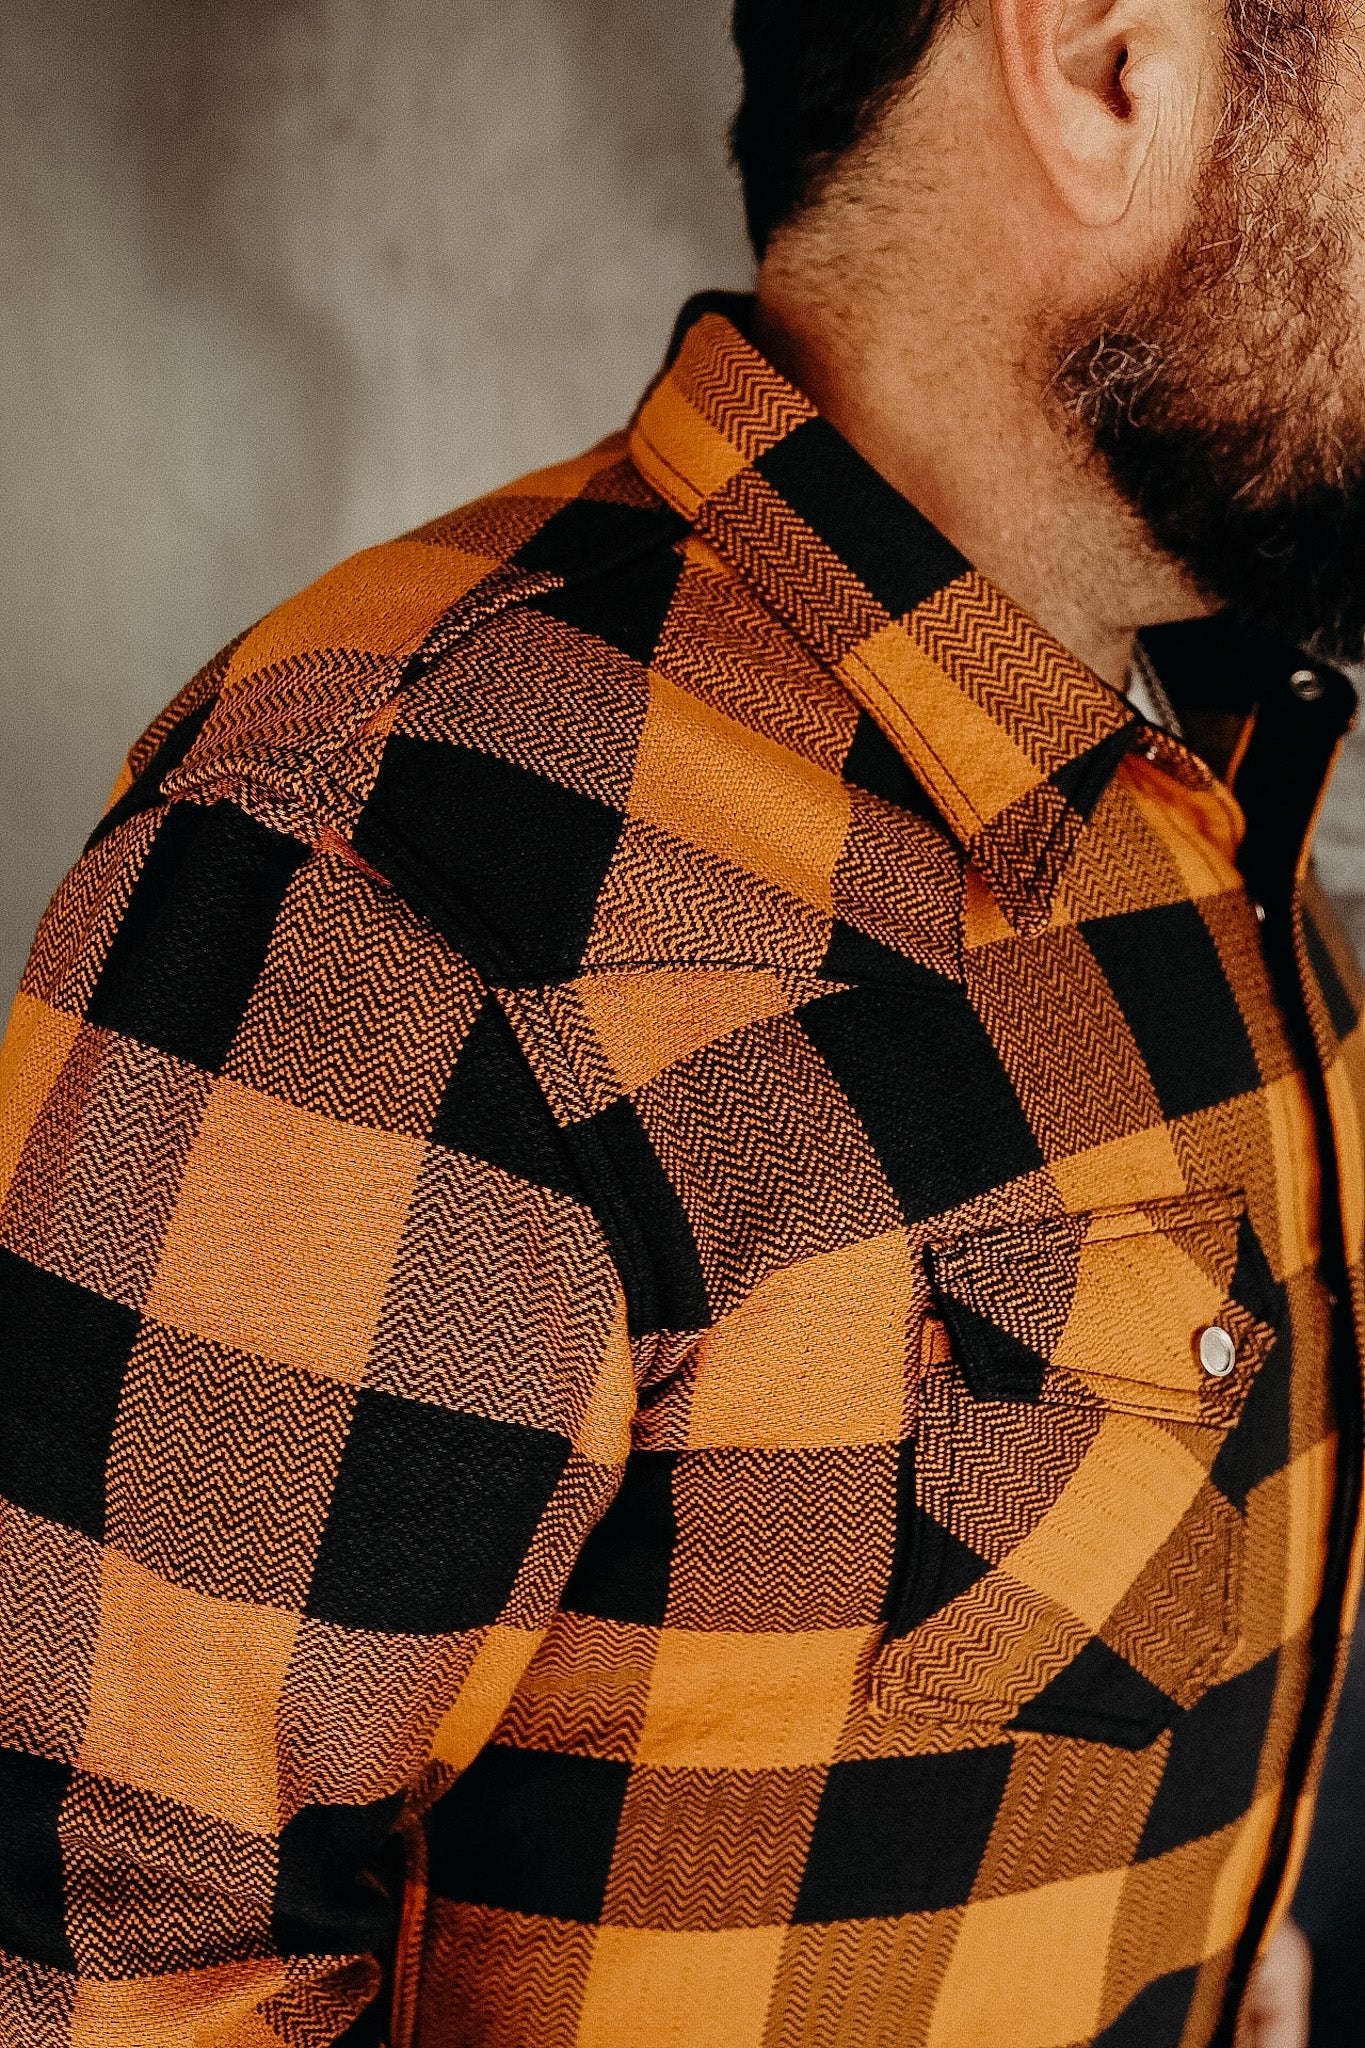 The Flat Head SNW-101L Block Check Western Flannel Shirt - Orange / Charcoal